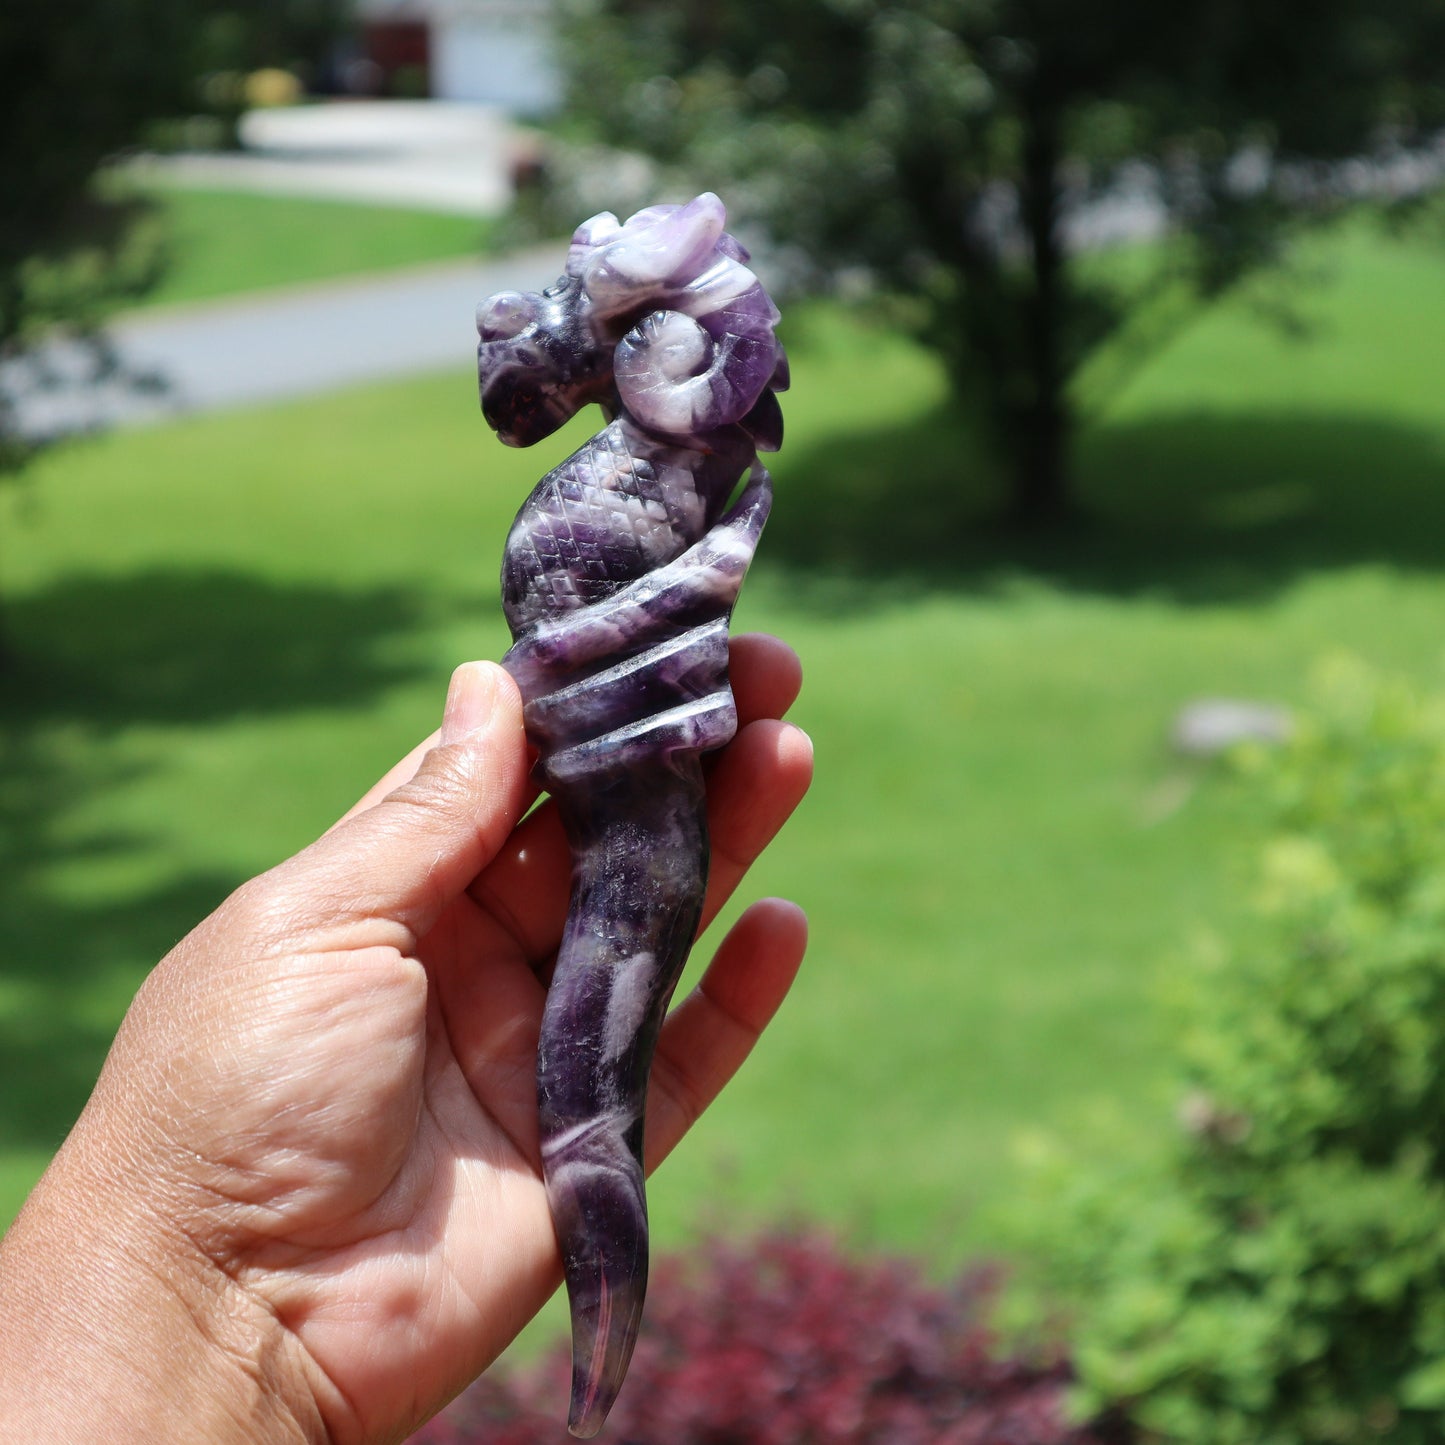 Dream Amethyst Wand, Crystal Healing Wand, Flying Dragon Wand, Magical Wand, Ritual Wand, Magical Tool for Spells and Rituals, Crystal Wand